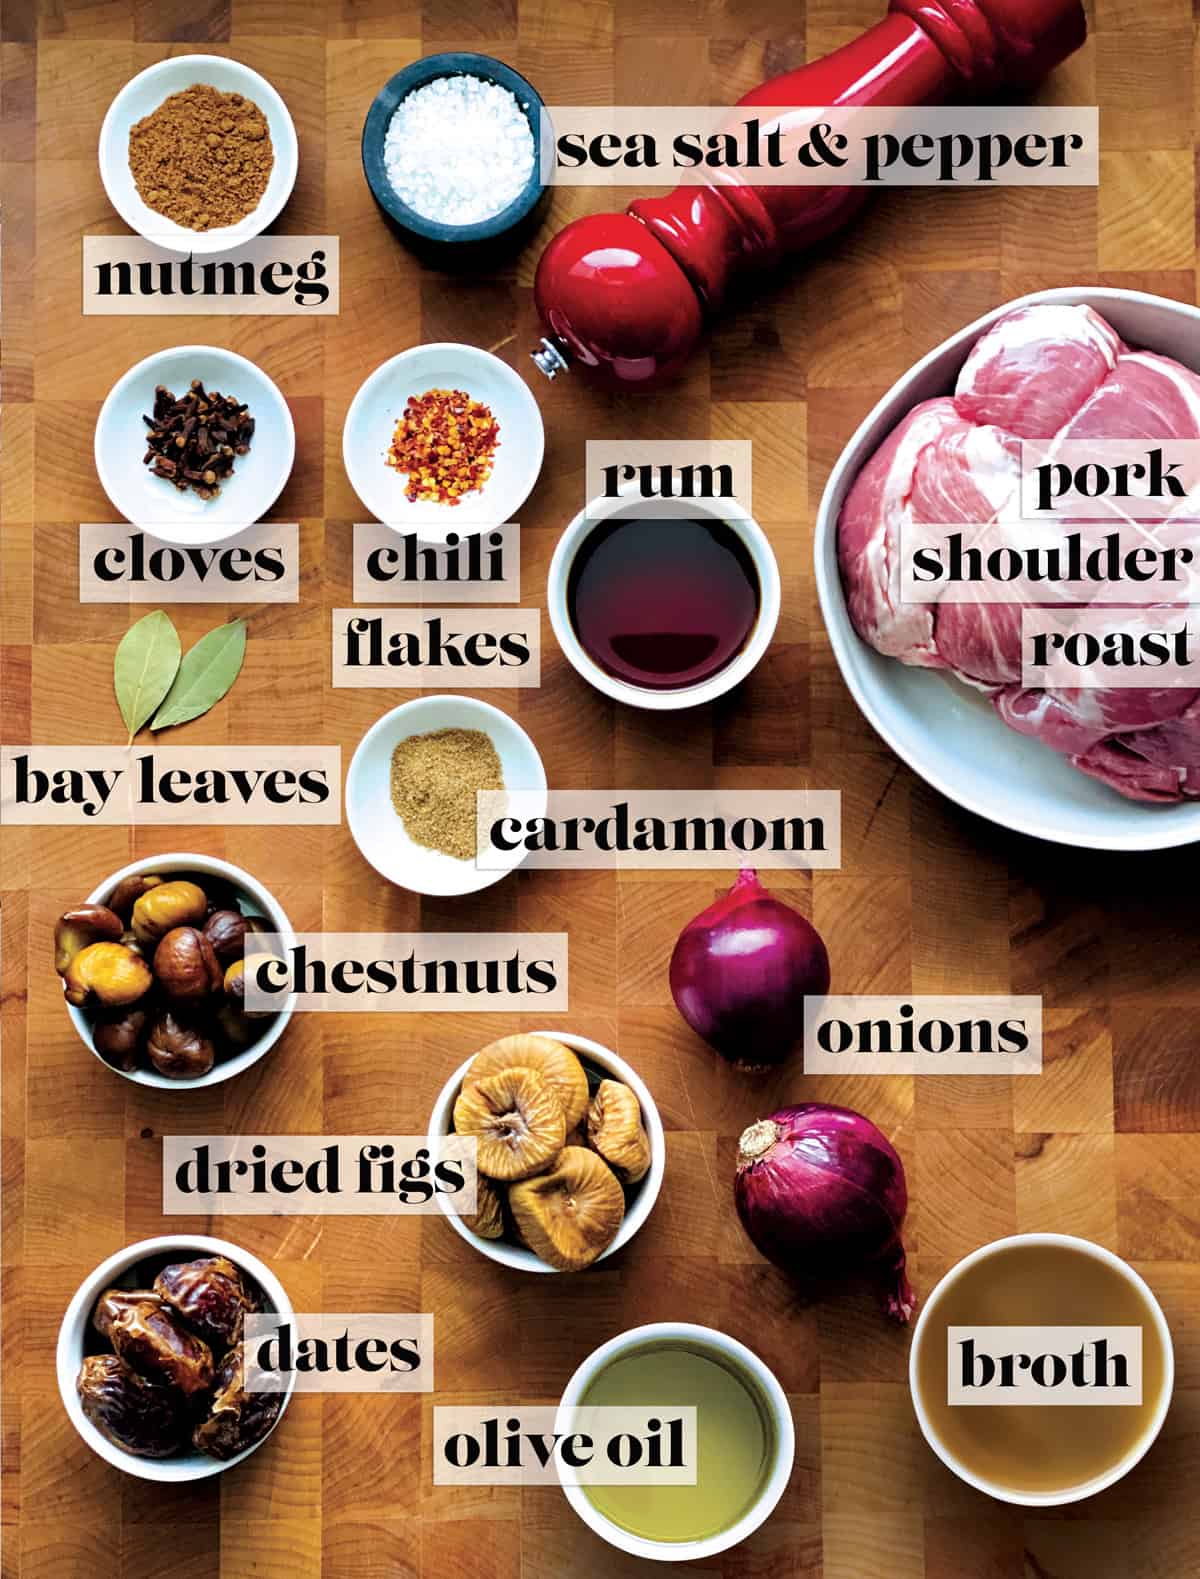 Ingredients for a holiday roast on a butcher block.